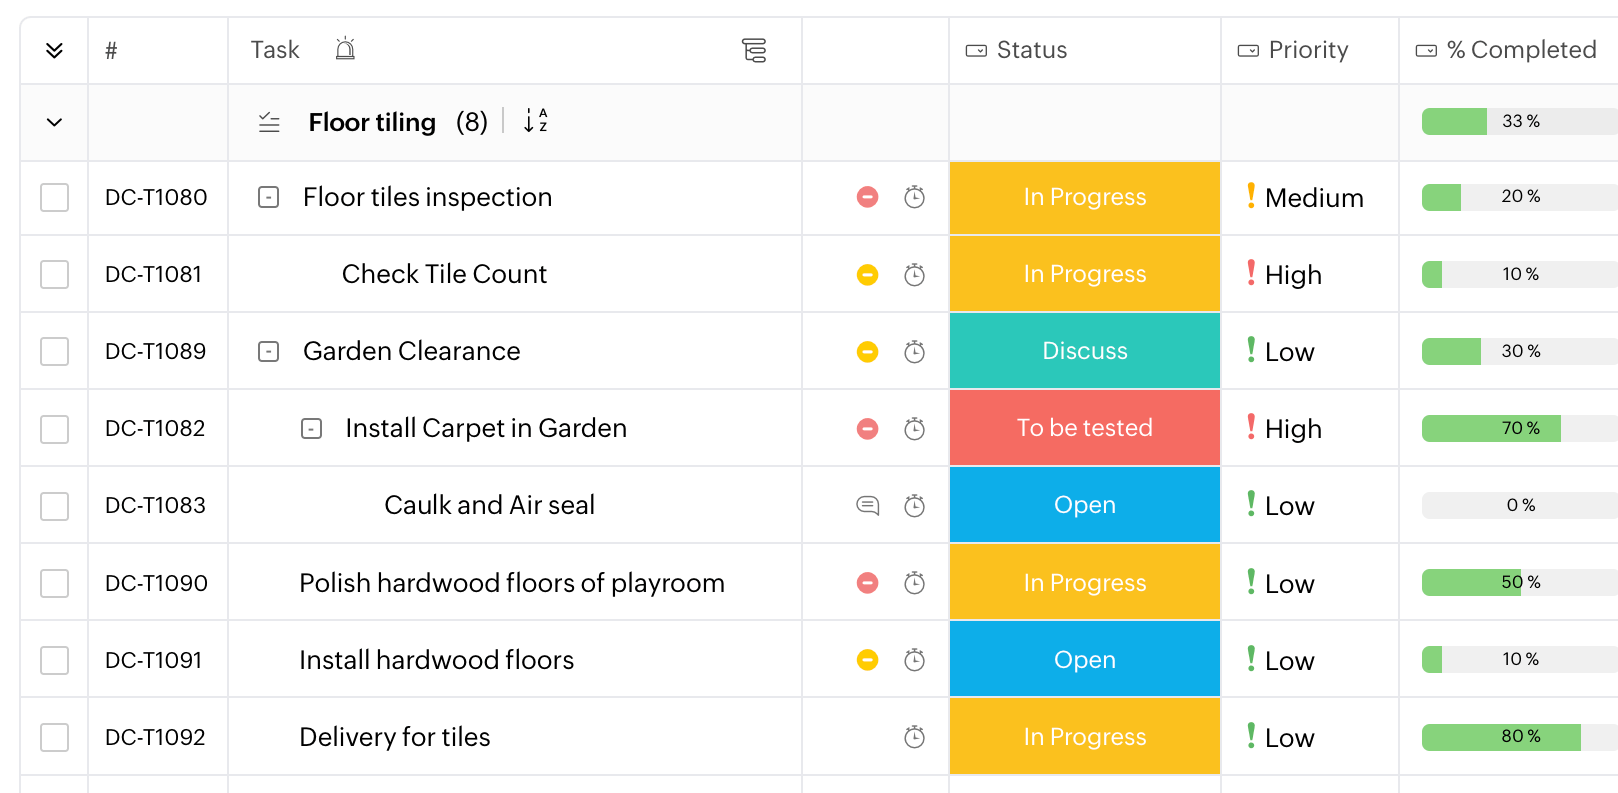 Project management built to keep track of all your work